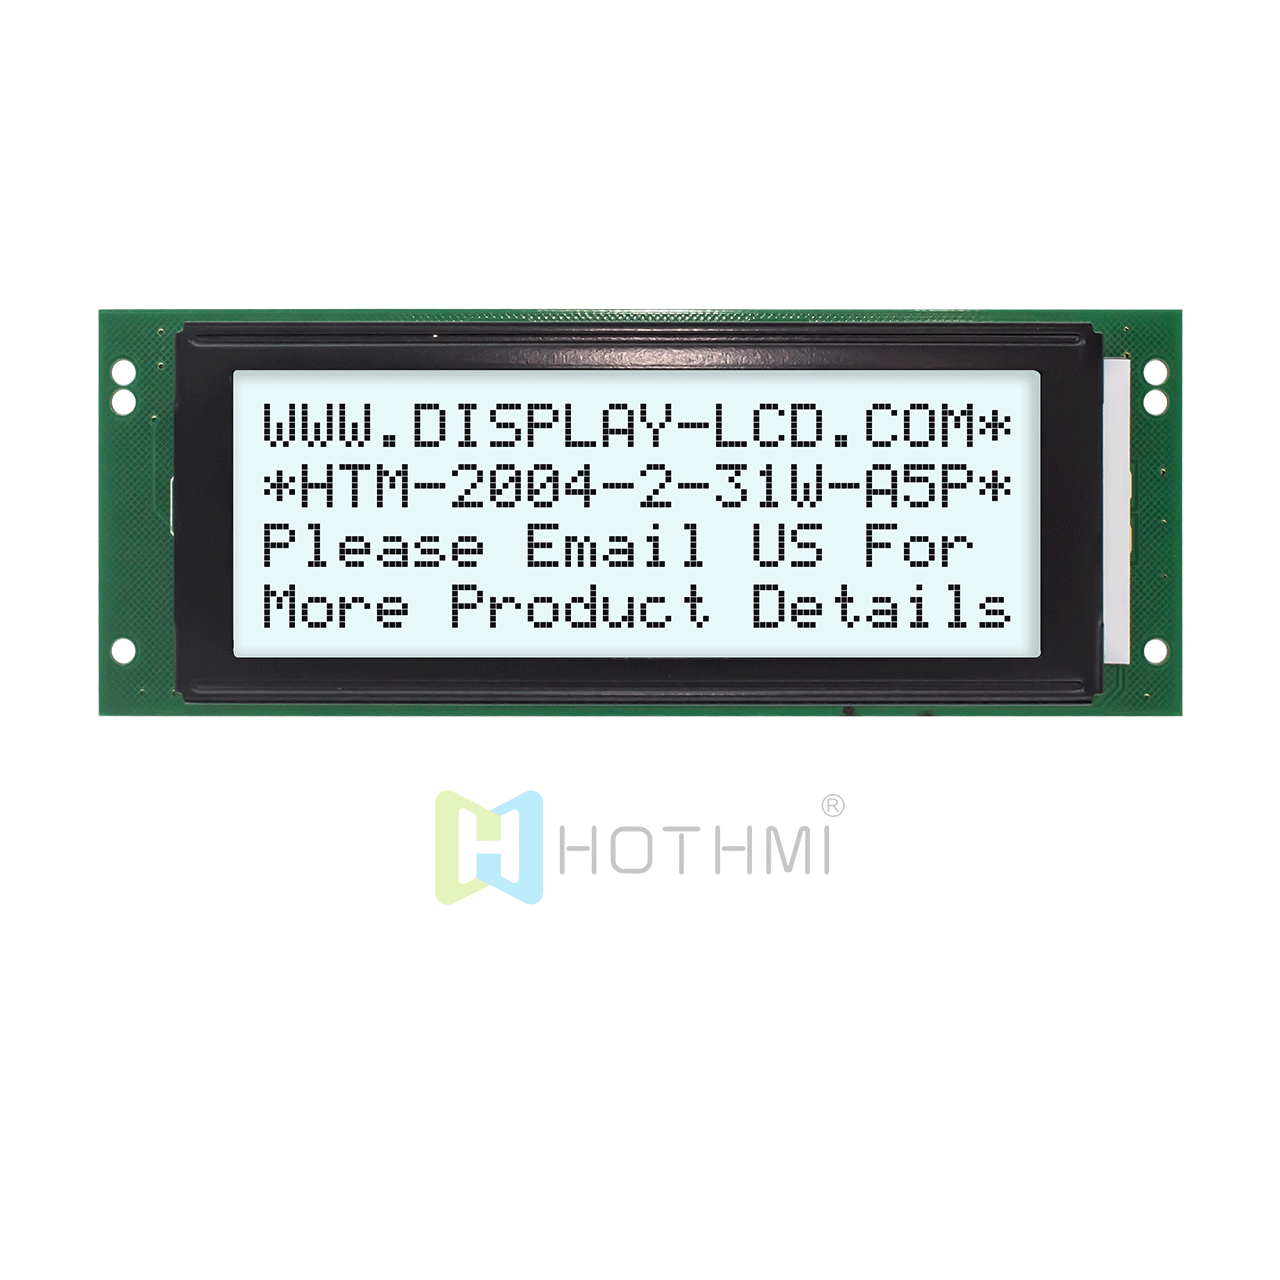 5.0V/4X20 monochrome character LCD module/STN+ display/with white backlight/white background gray text display/Arduino display